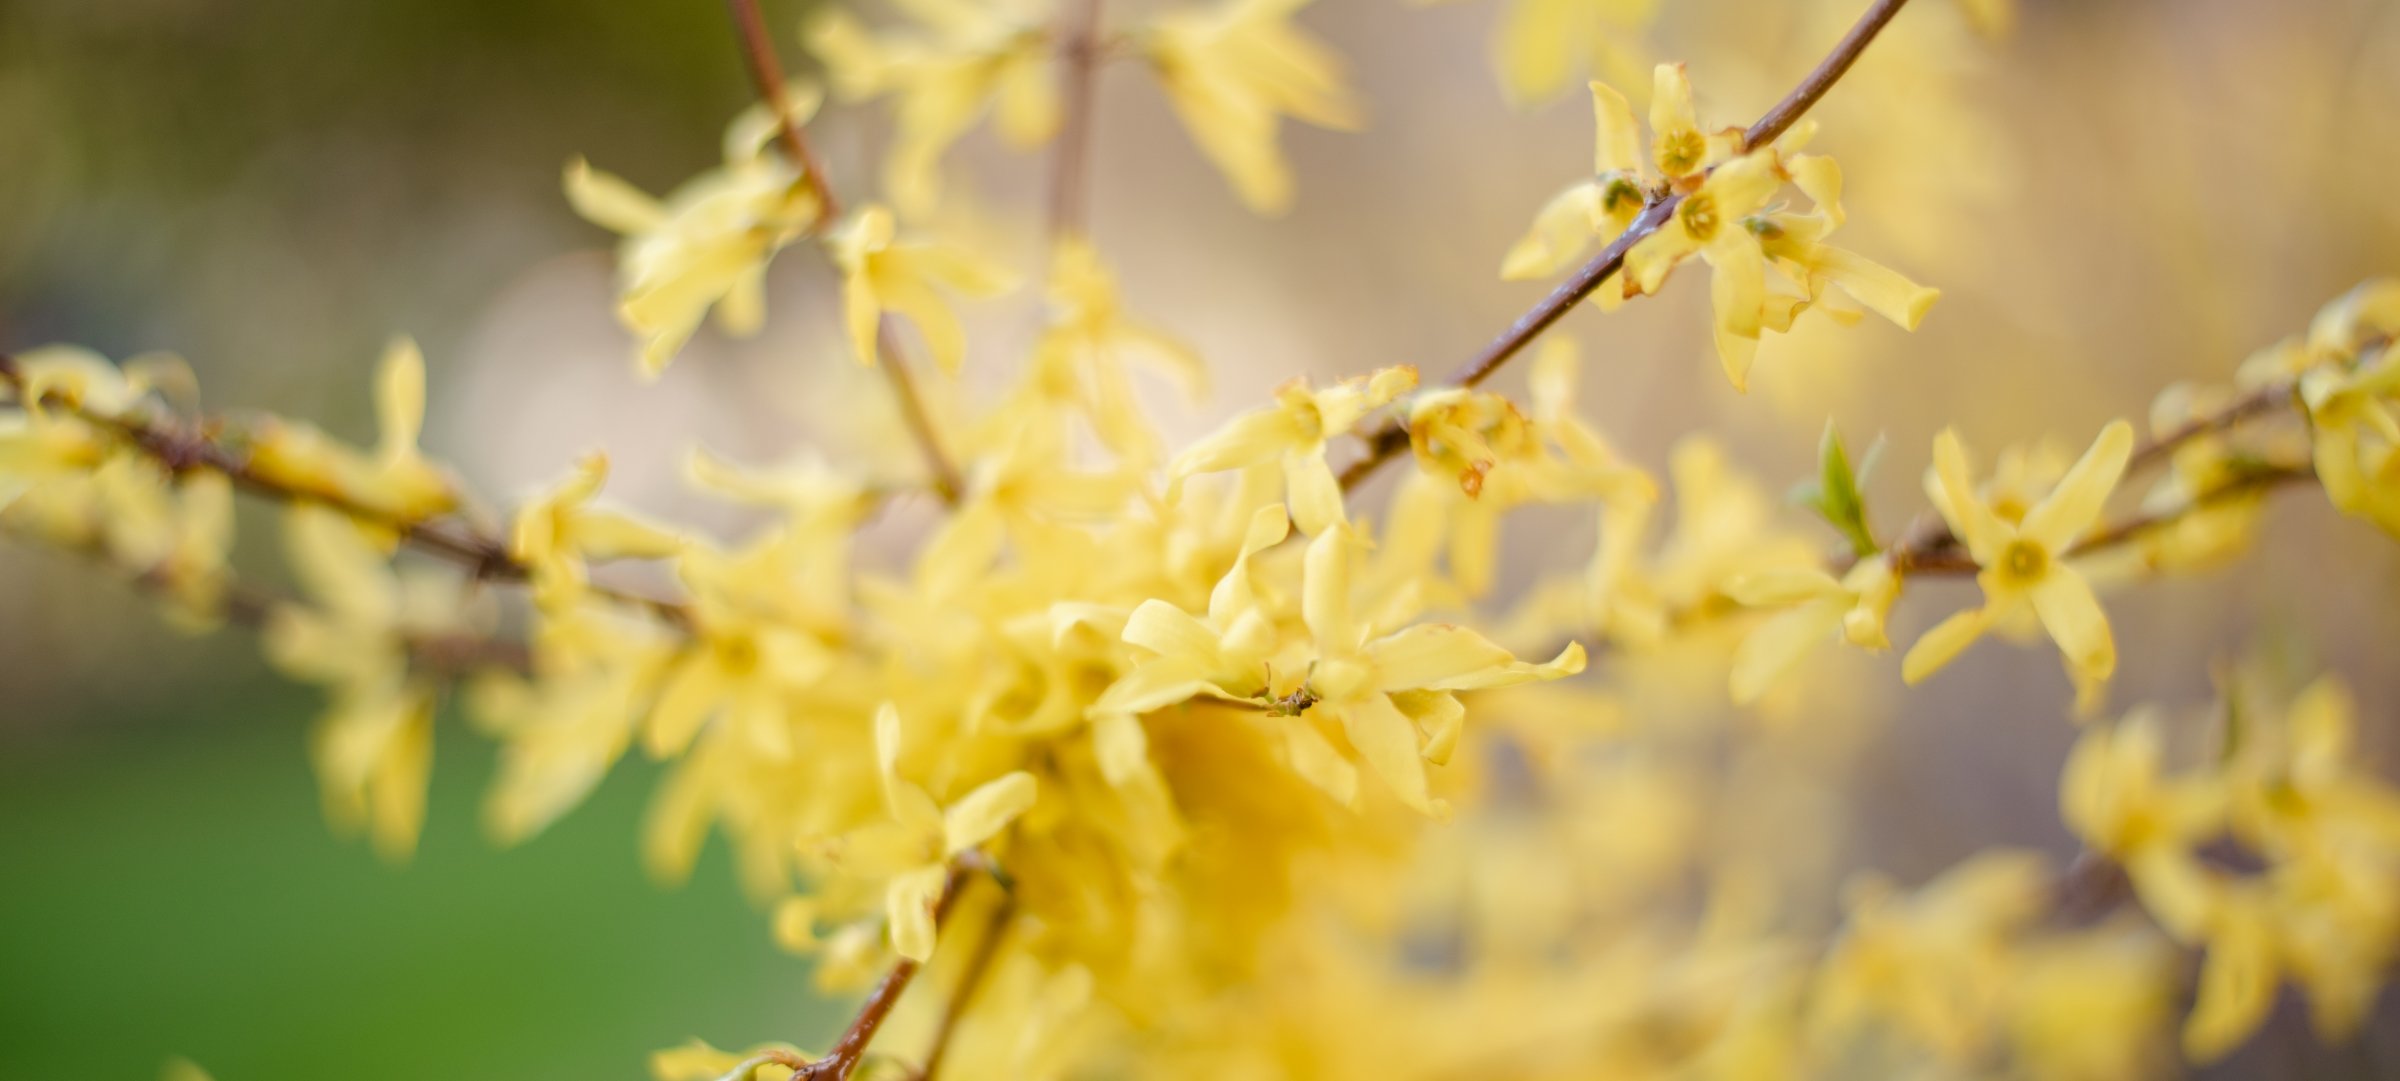 Close-up of yellow flowers on thin branches.